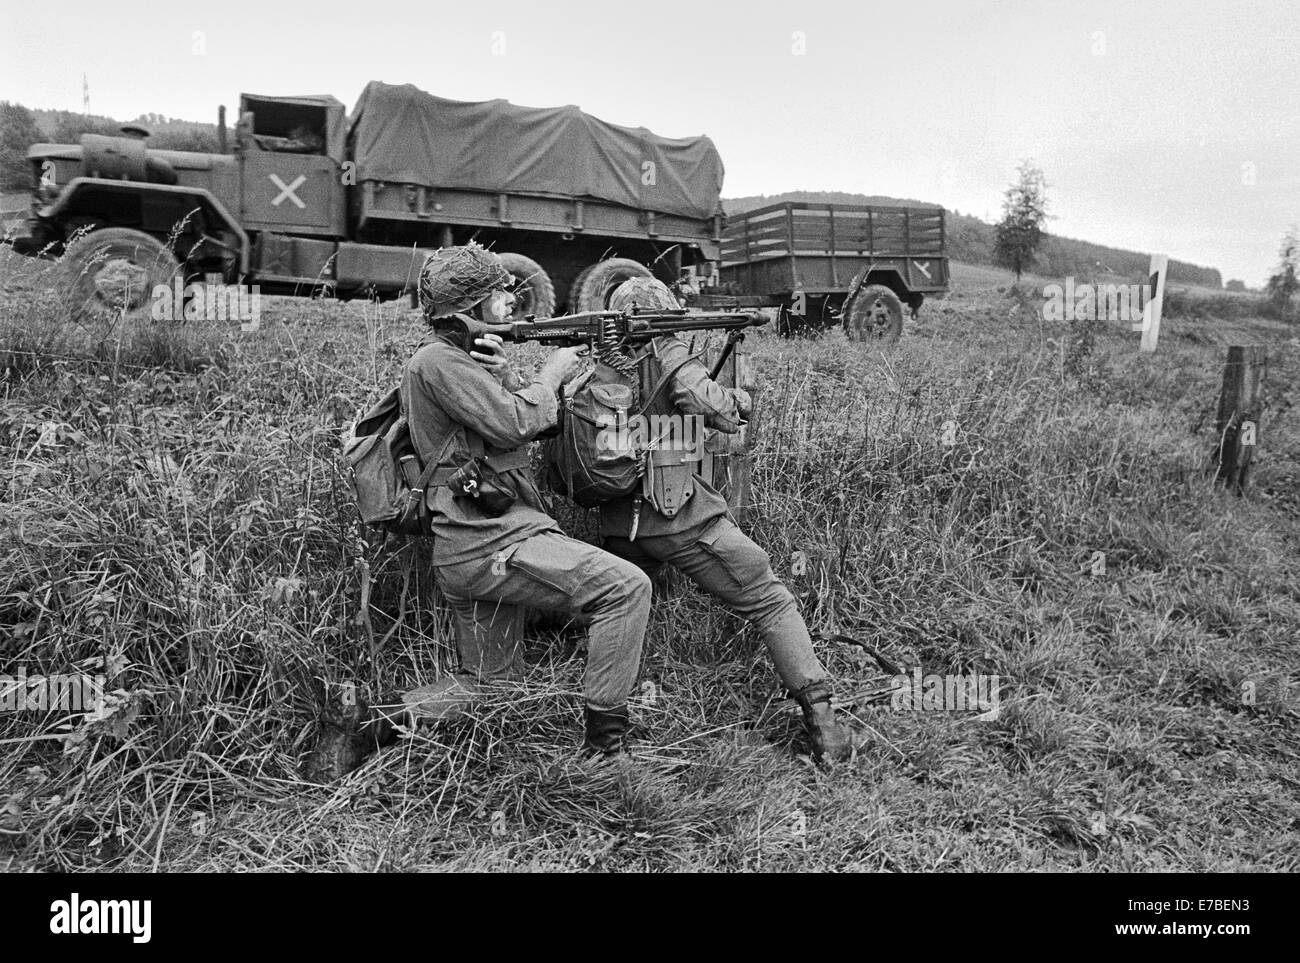 NATO exercises in Germany, German Army soldiers (September 1986) Stock Photo